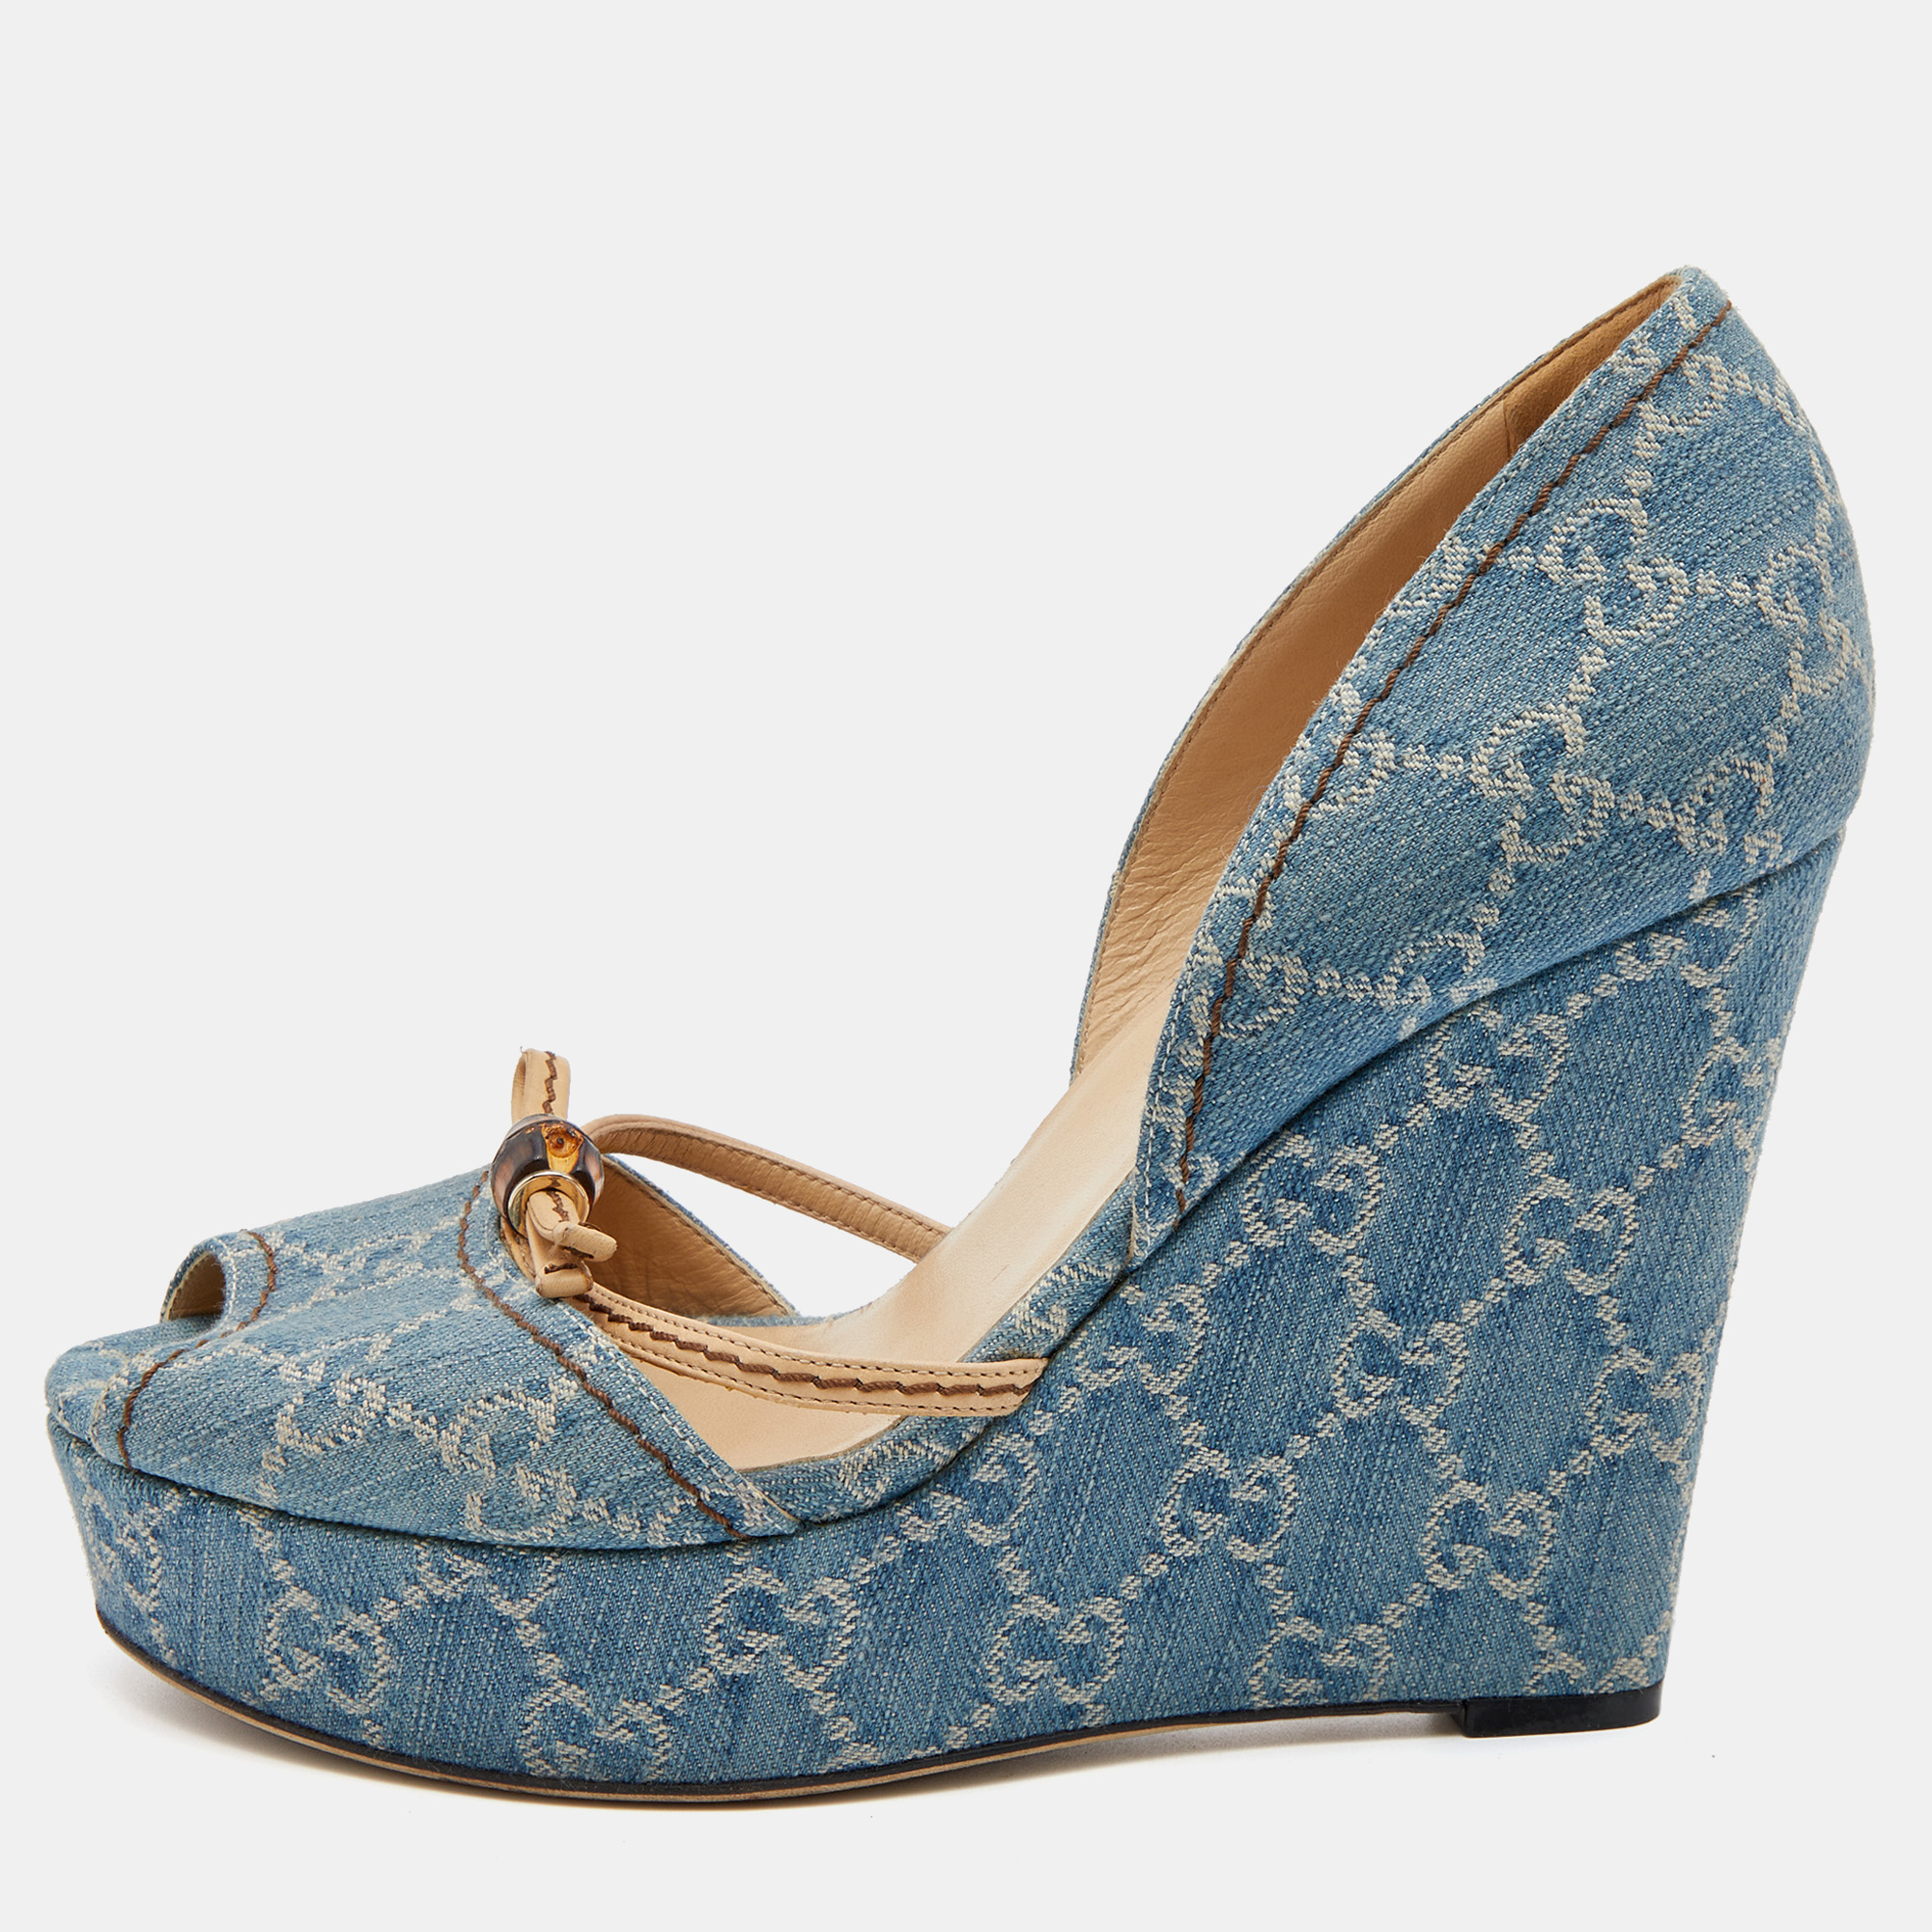 Pre-owned Gucci Blue Gg Canvas Bamboo Peep Toe Platform Wedge Pumps Size 39